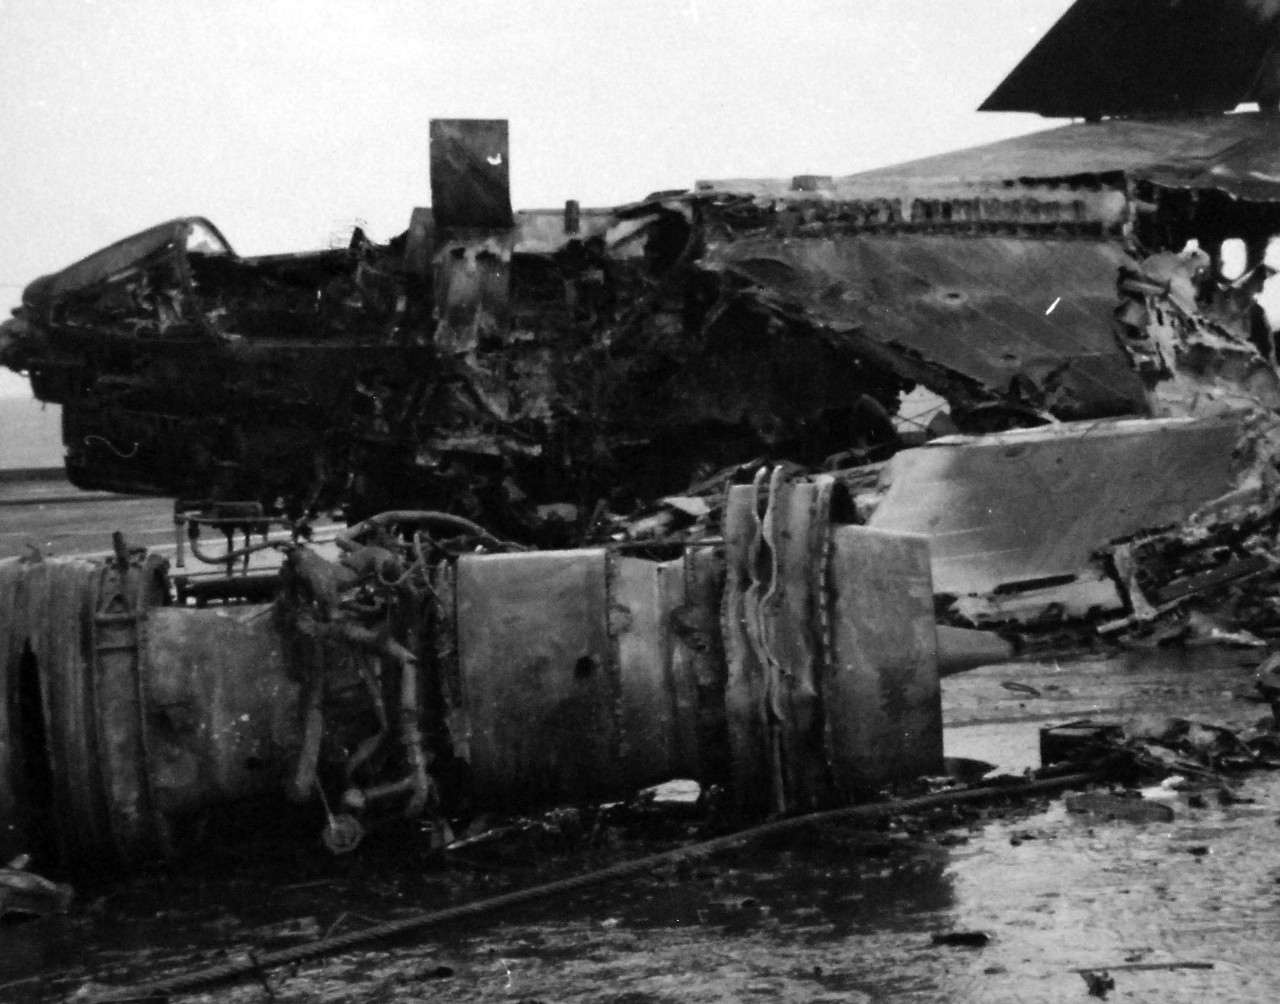 428-GX-USN-1140818:    USS Enterprise (CVAN-65), January 1969.     Pacific Ocean.  The remains of an A-7 “Corsair II” attack aircraft on the flight deck of USS Enterprise (CVN 65).  The aircraft was destroyed as the ship was conducting air operations 75 miles south of Pearl Harbor.   Photographed by PH2 Patrick J. Ryan, January 14, 1969.       Official U.S. Navy photograph, now in the collections of the National Archives.   (2016/07/26).